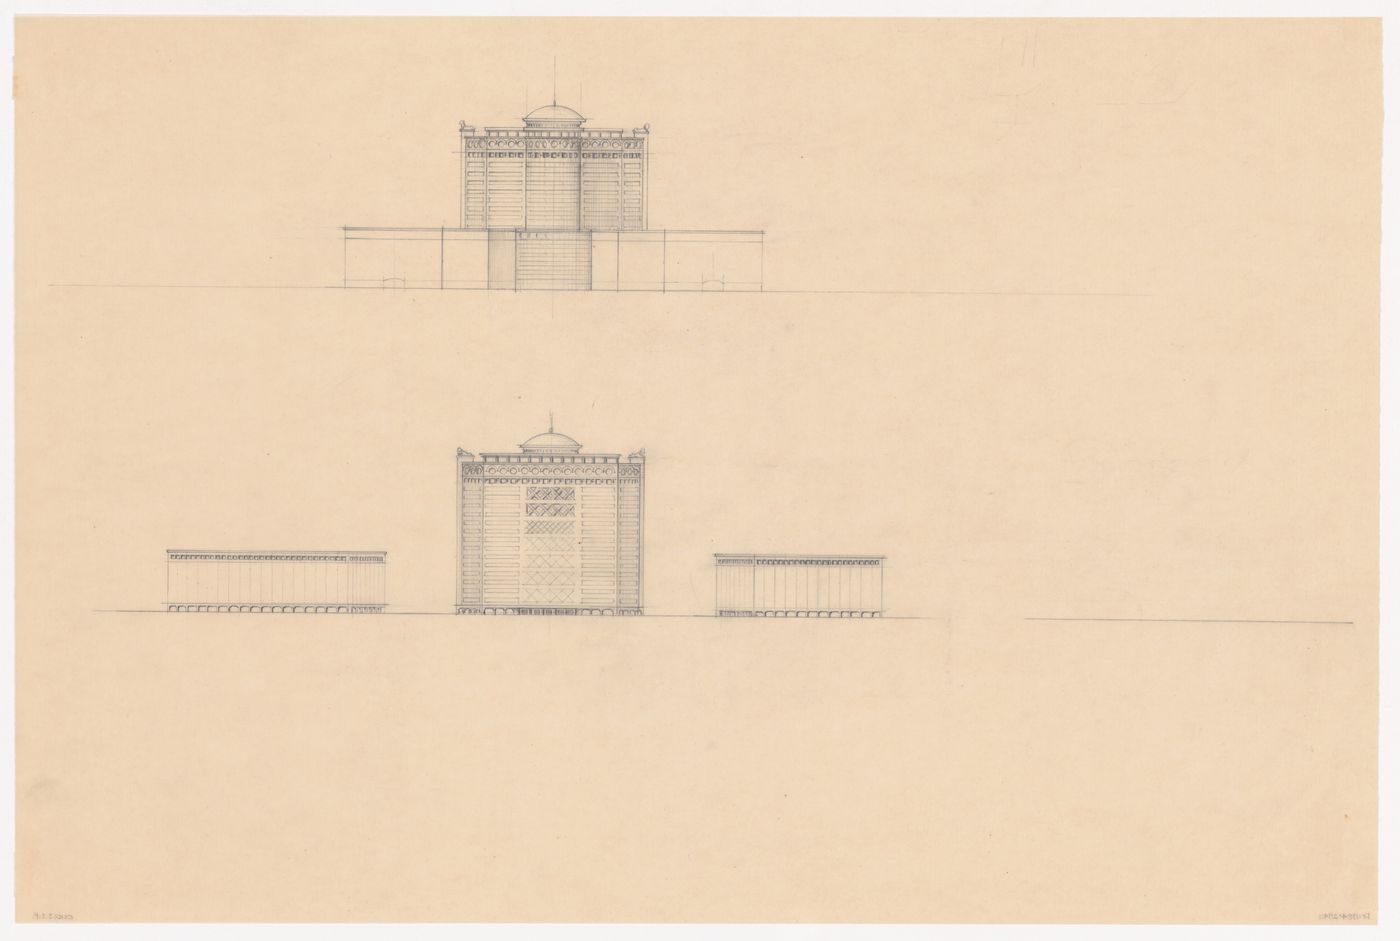 Elevations for Industriegebouw Plan A for the reconstruction of the Hofplein (city centre), Rotterdam, Netherlands